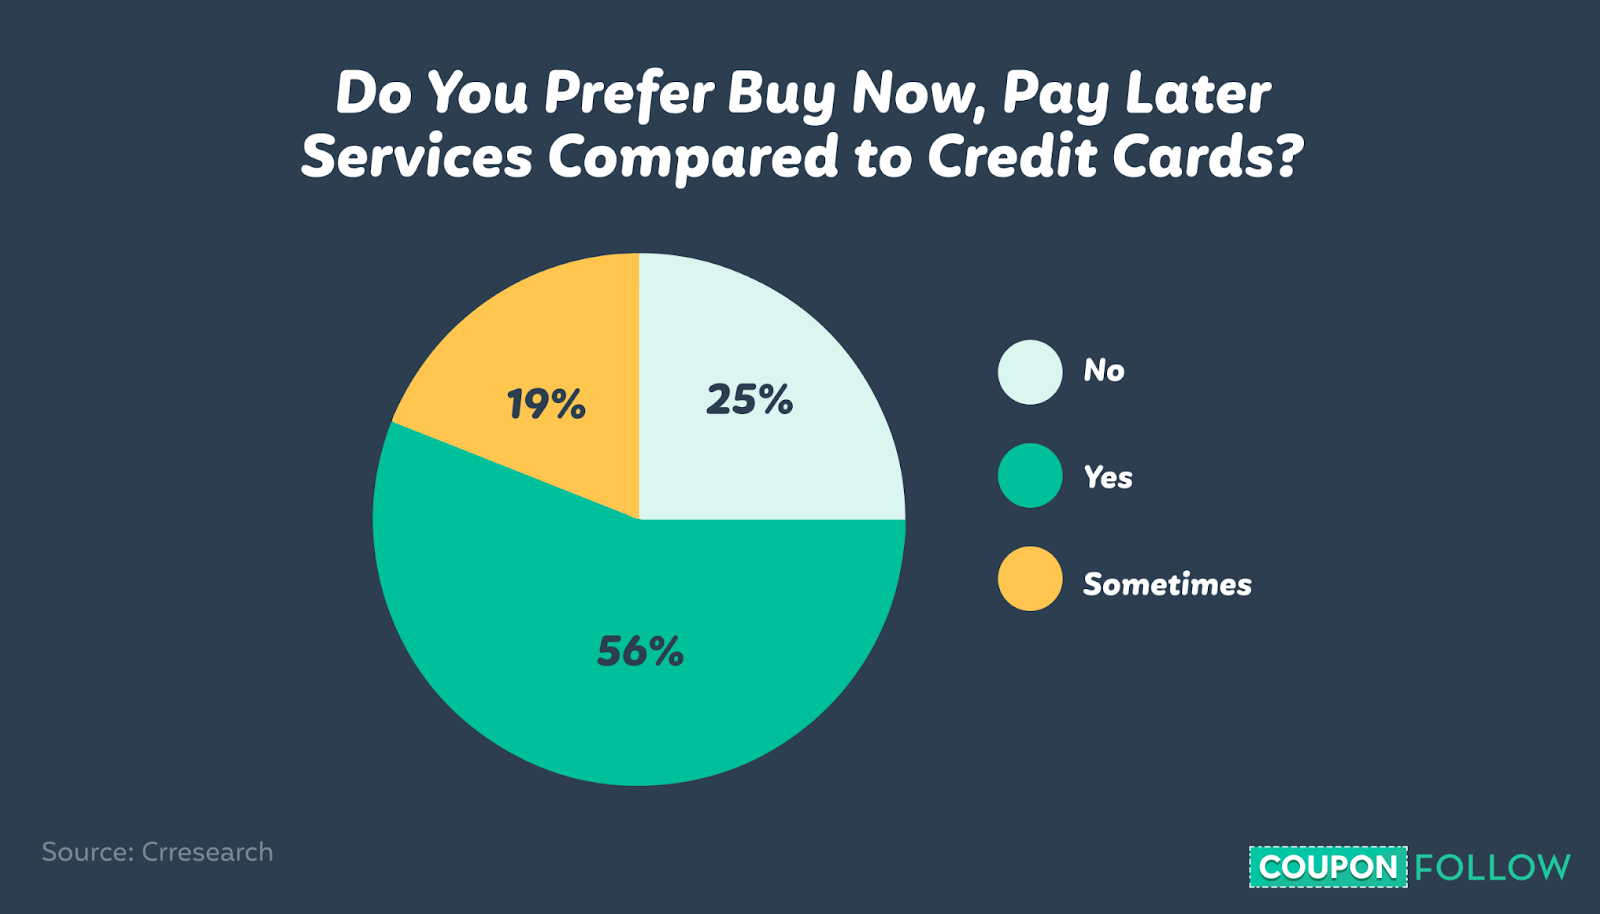 Customers' preference between BNPL and credit cards